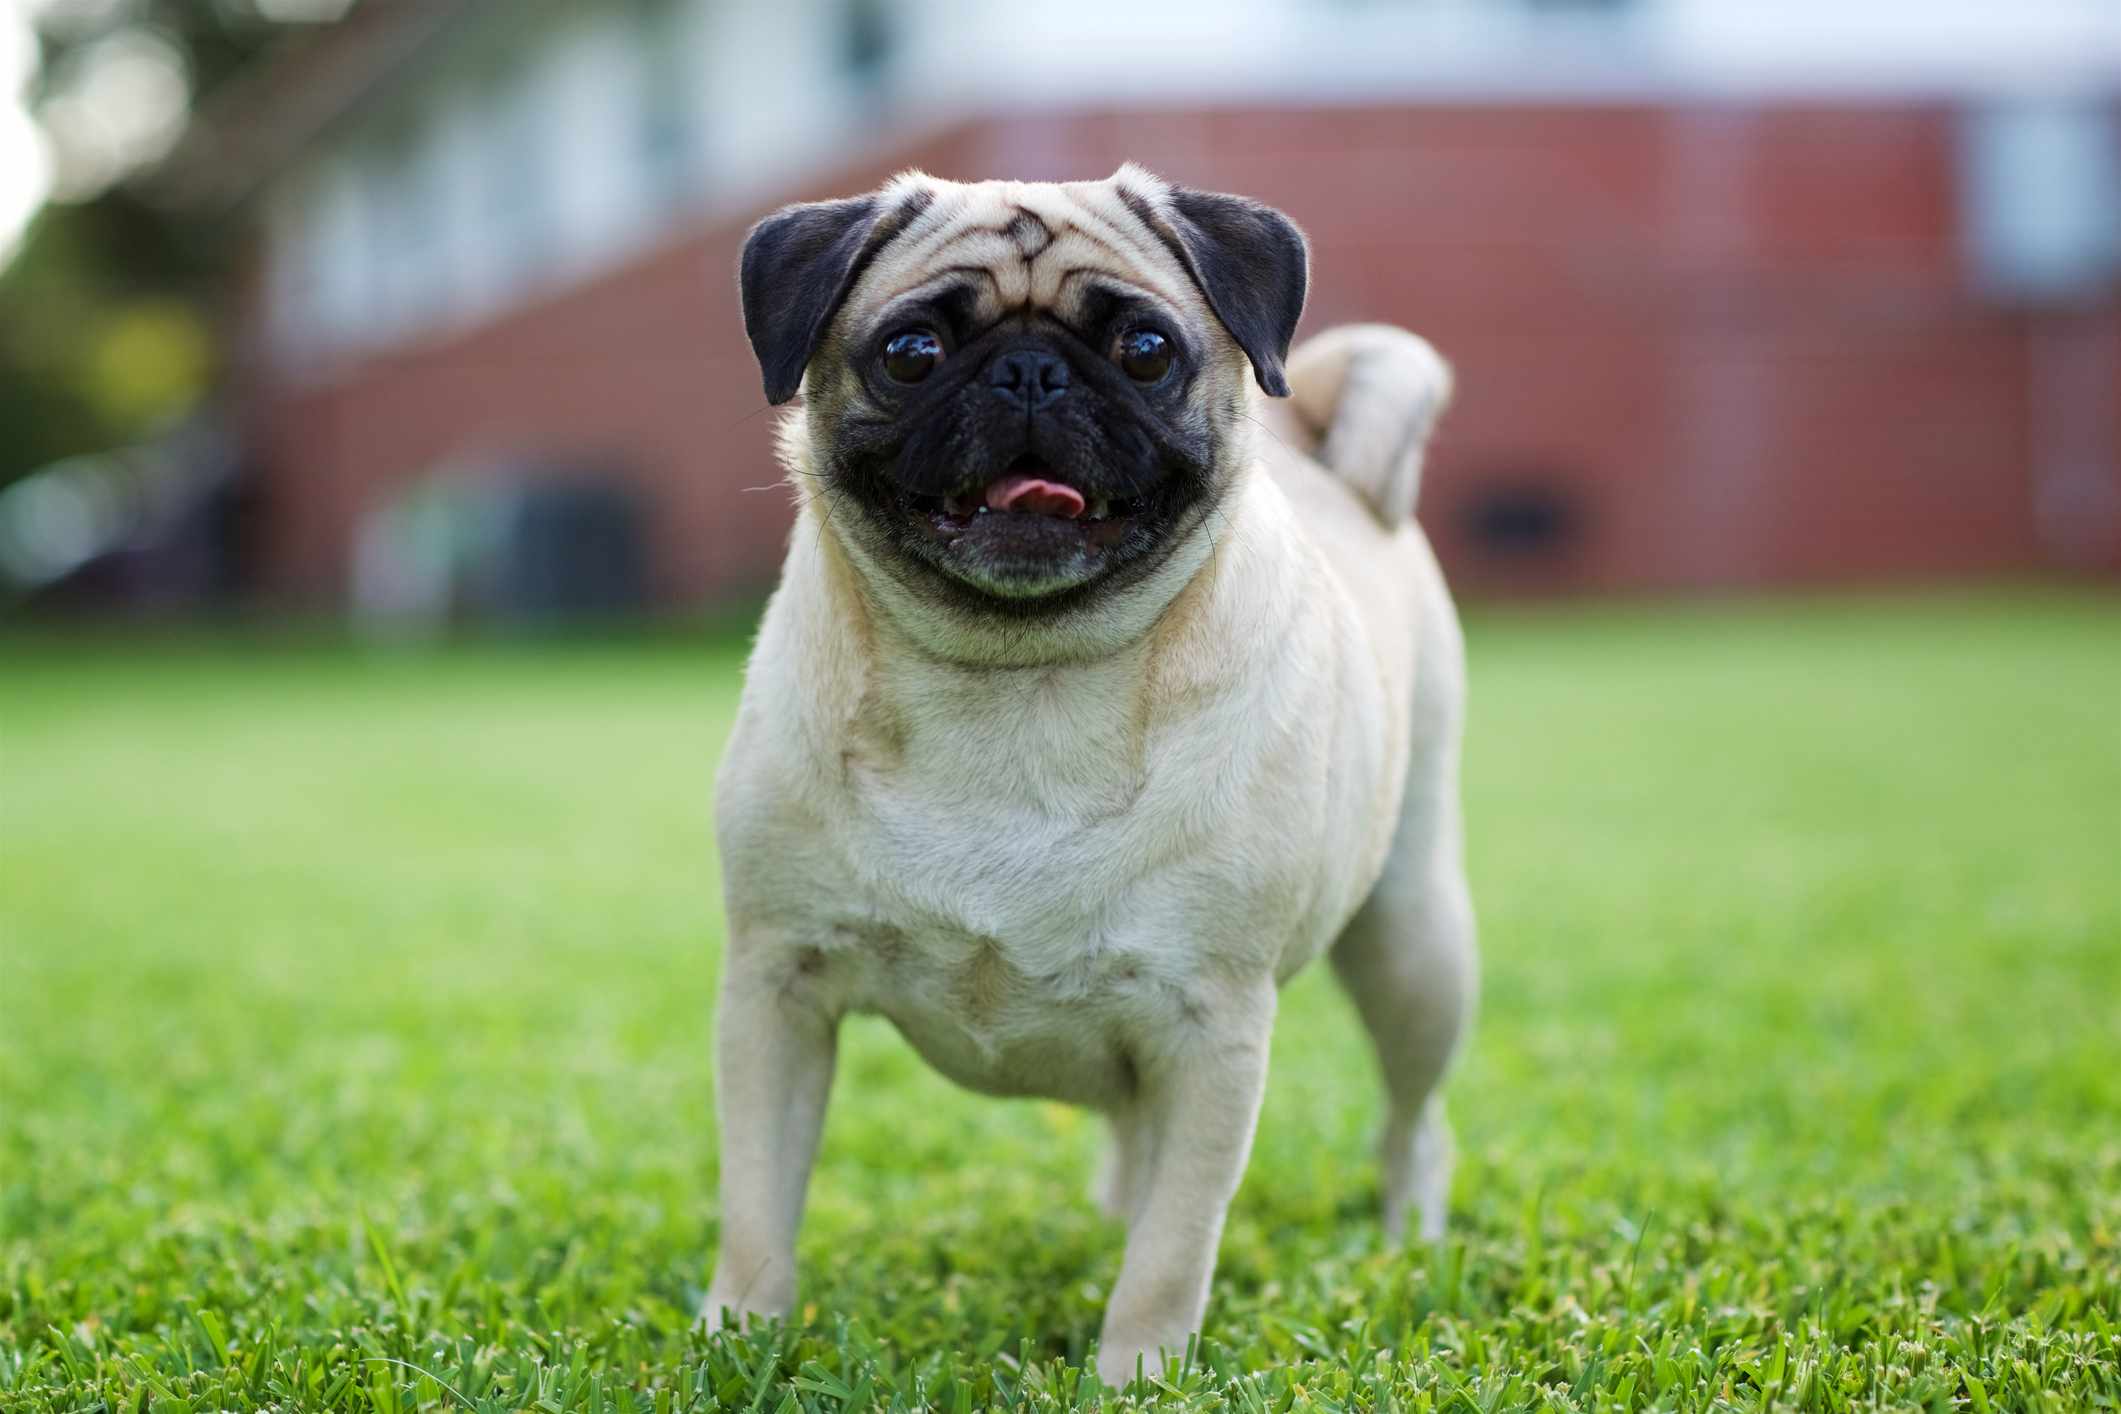 A tan pug with a black face standing in the grass looking at the camera with its tongue out.